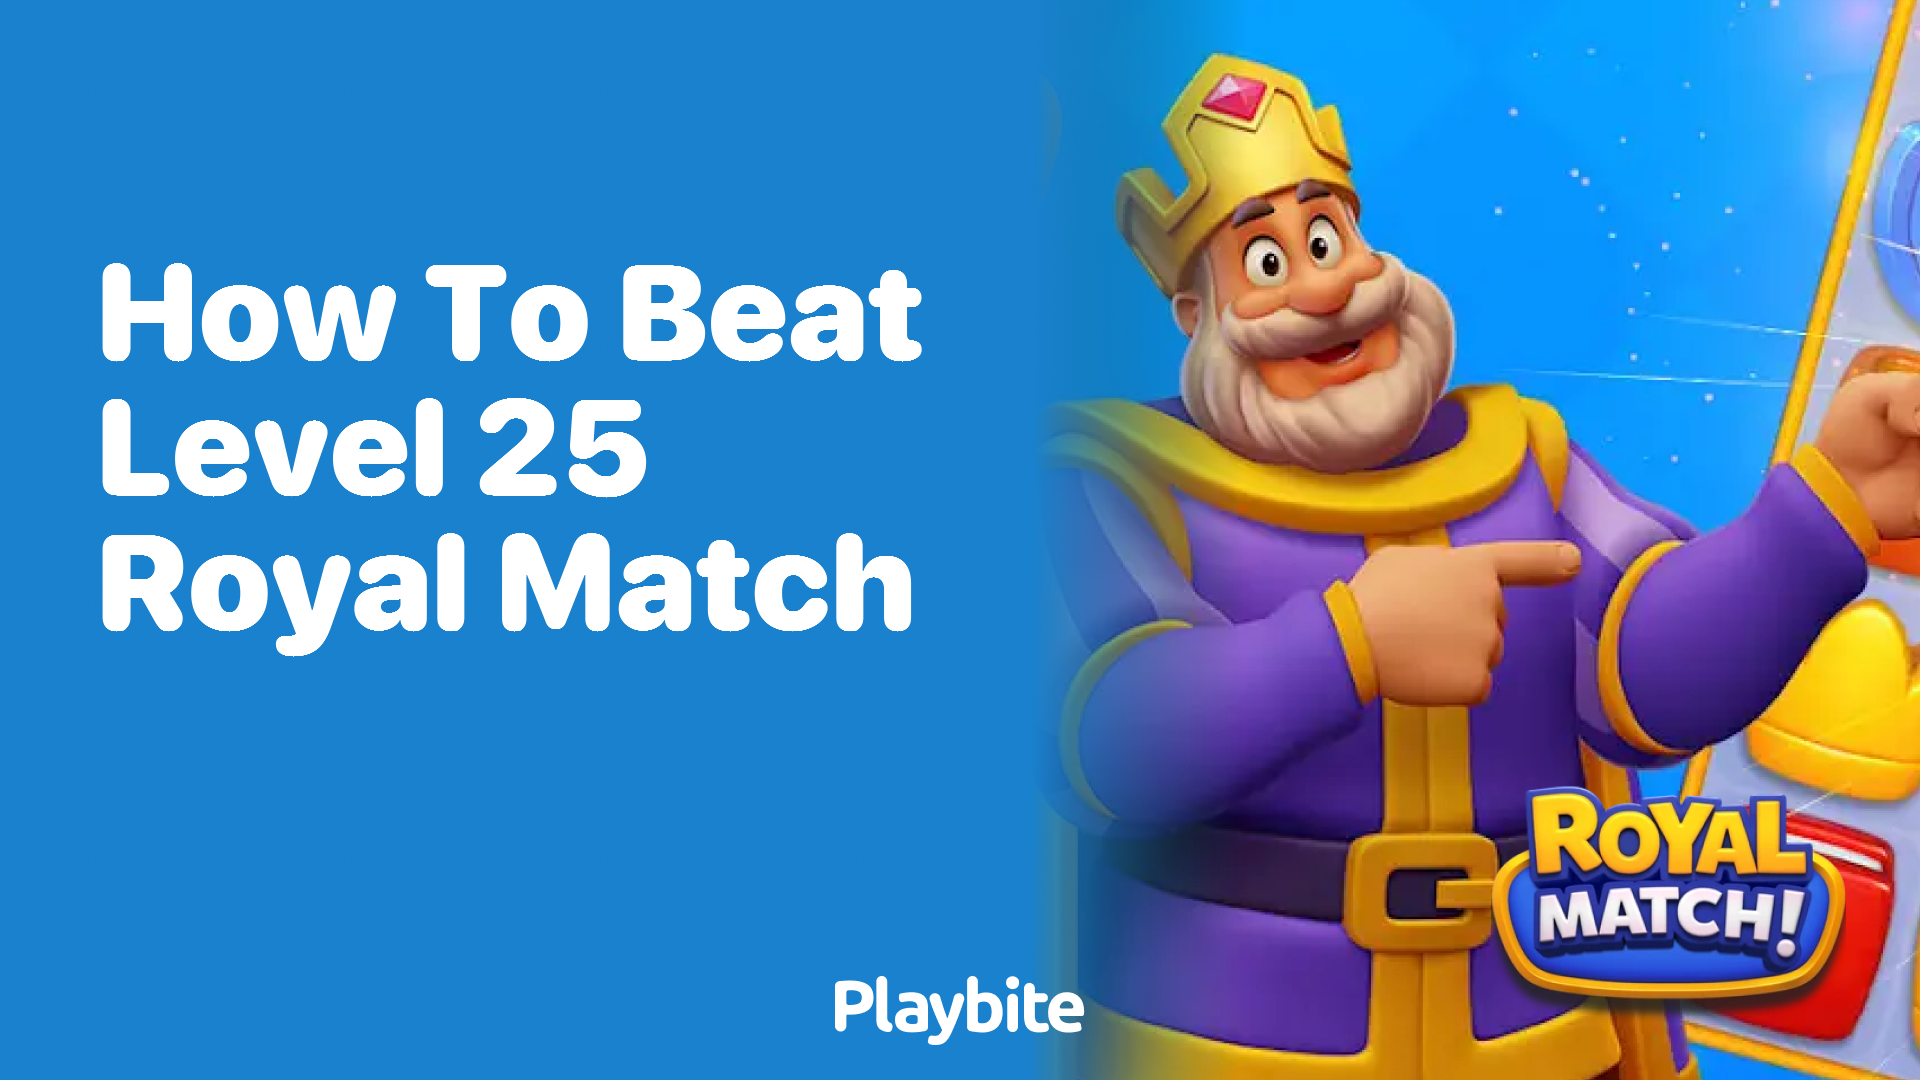 How to Beat Level 25 in Royal Match